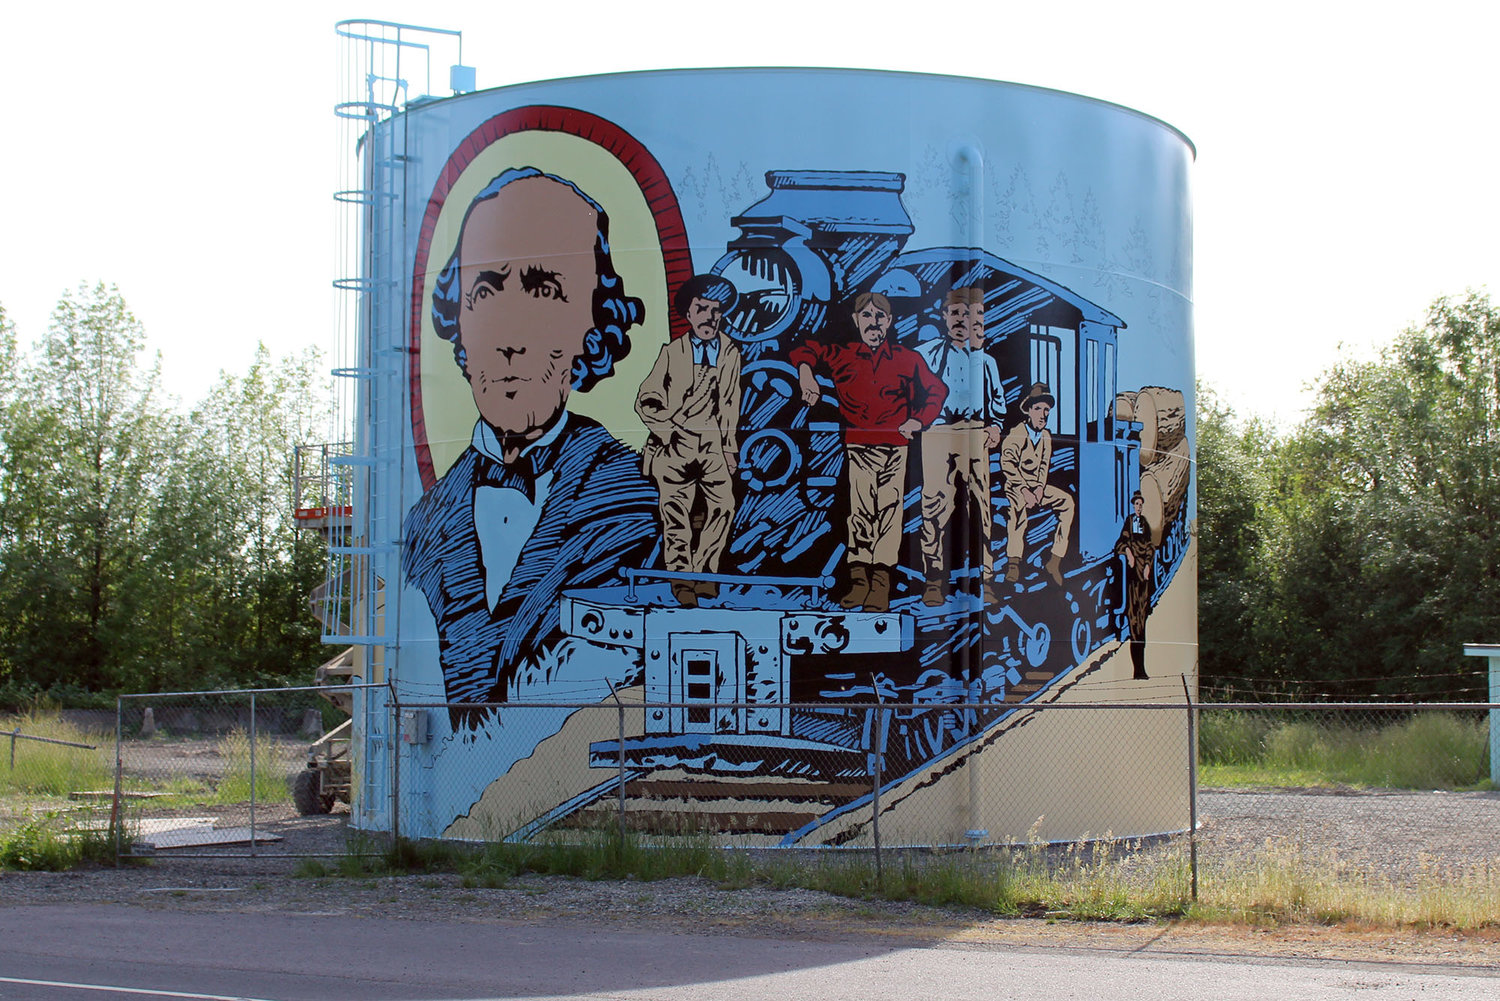 FILE PHOTO — Simon Plamondon, one of the first white settlers in the area, is at the forefront of this mural in Toledo. Next to him is a lumber train and faces of men who would have worked on it.